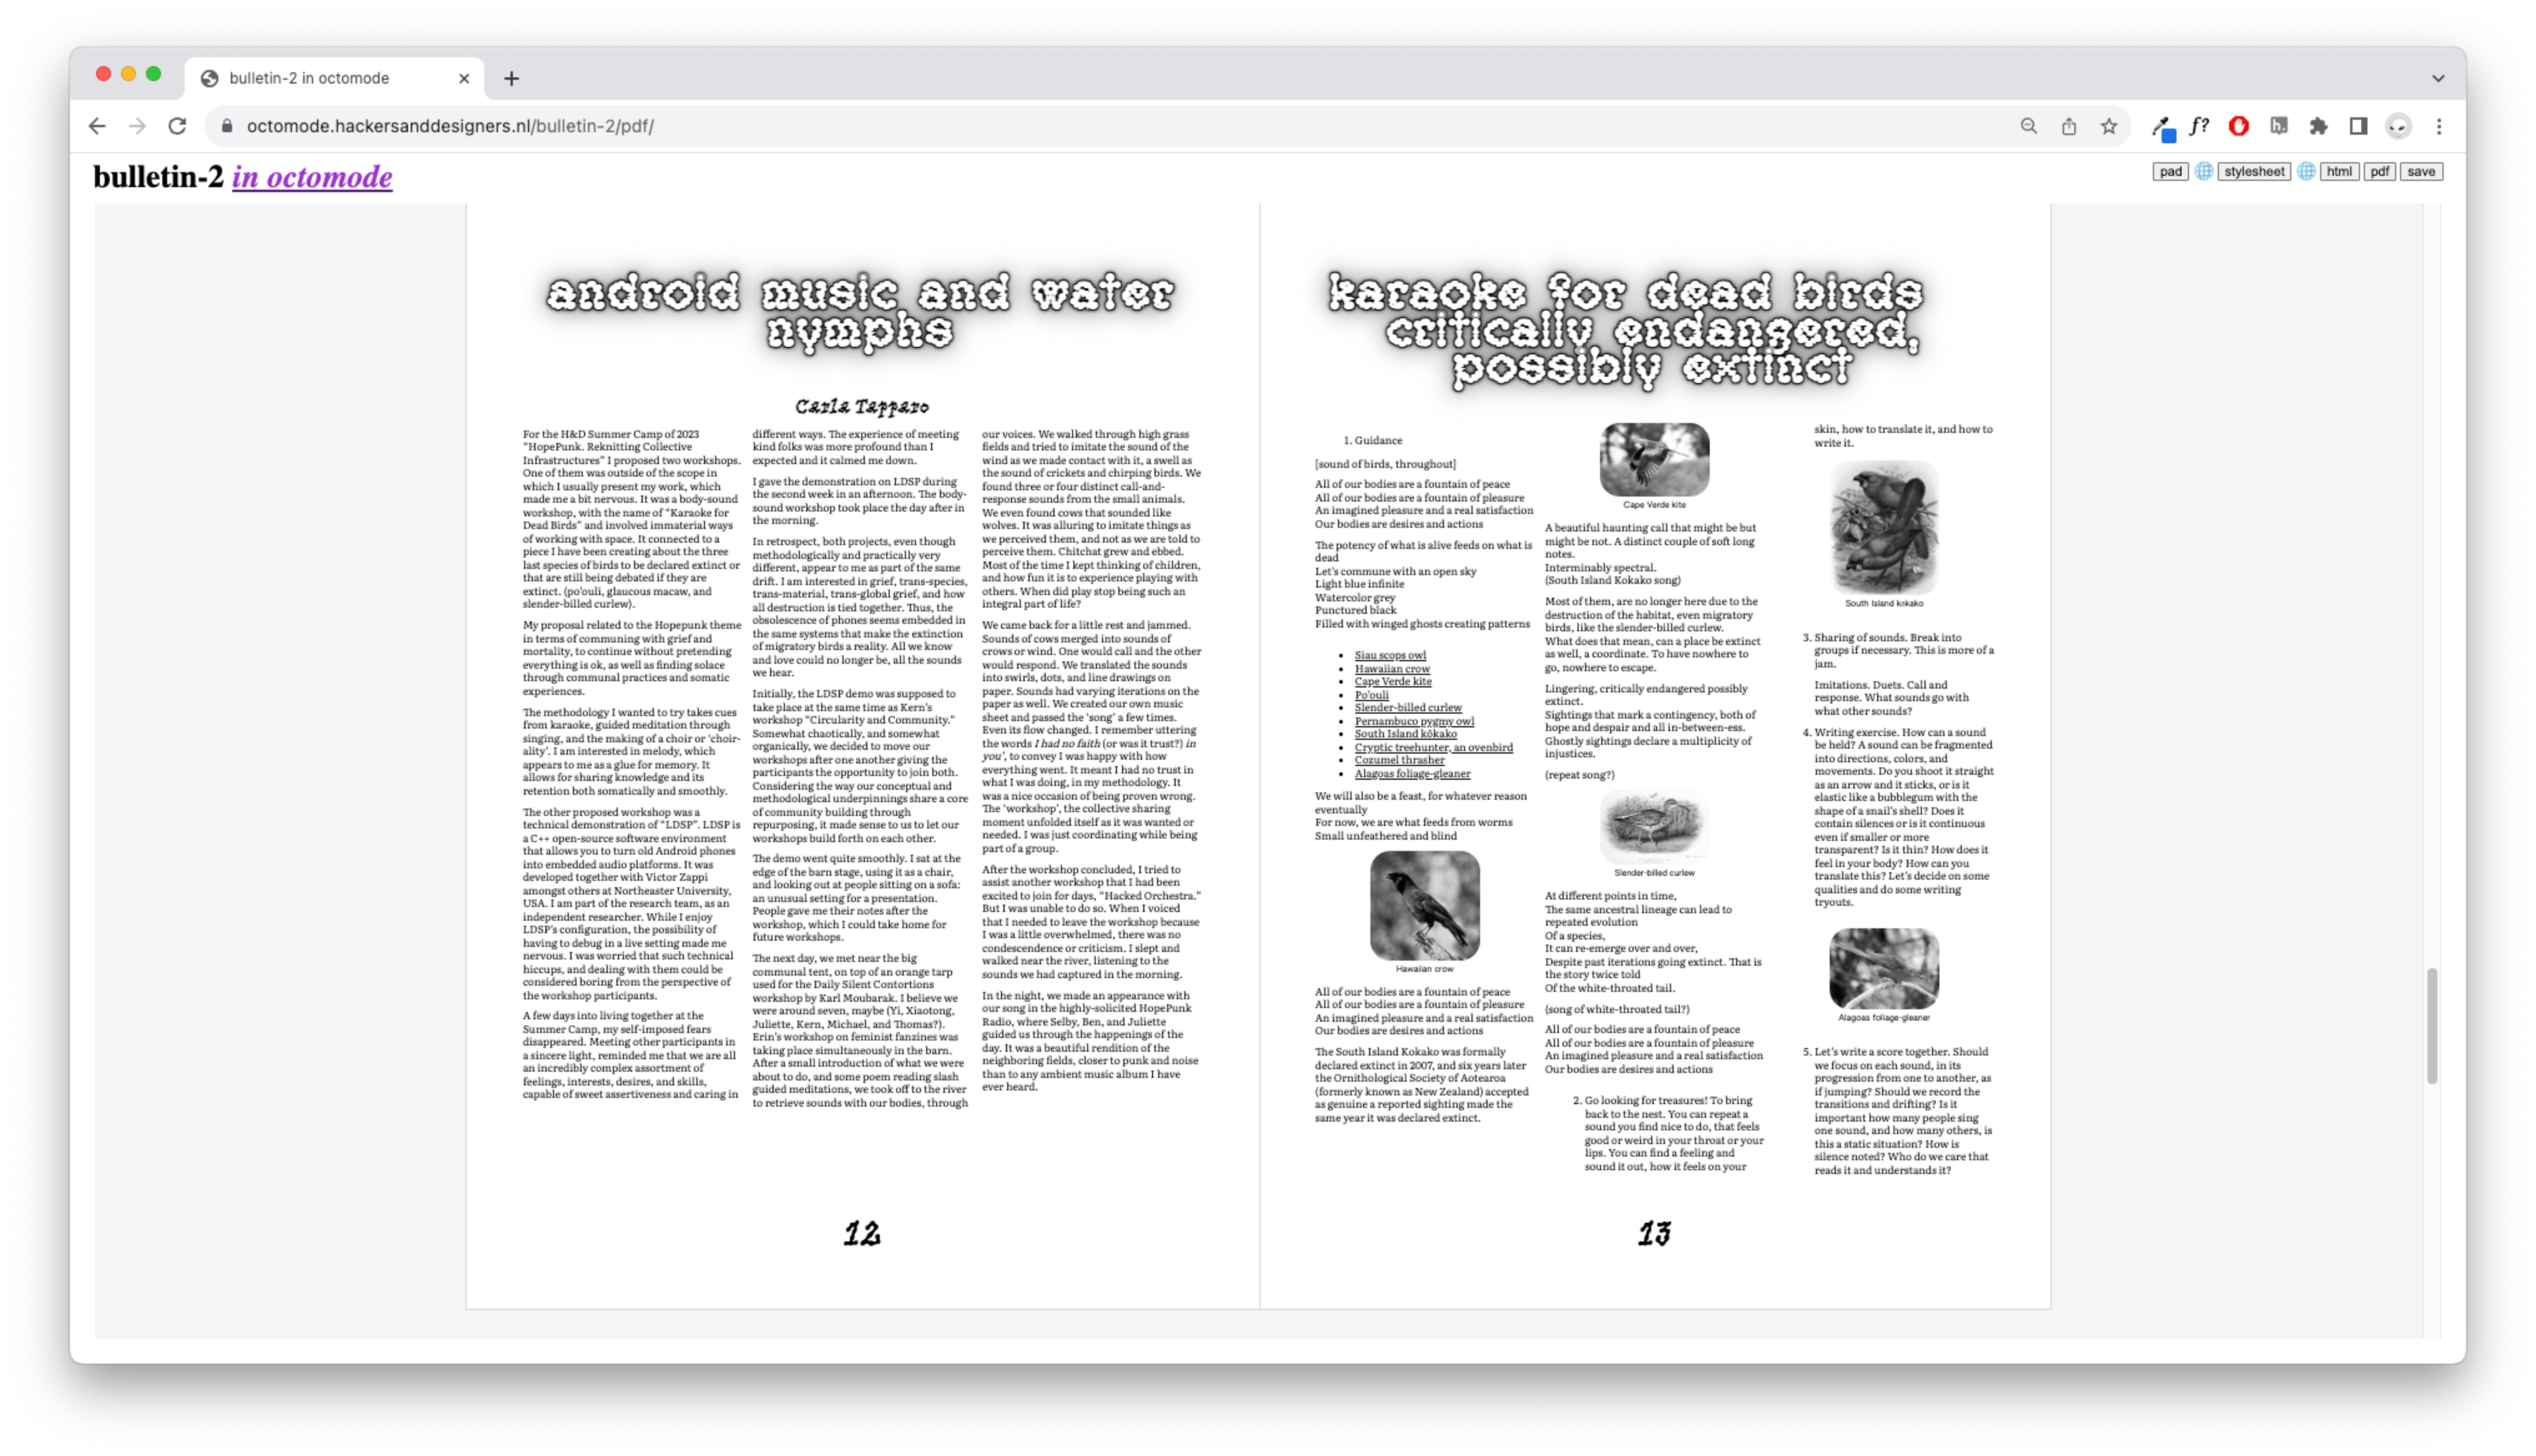 ID: A double page of the H&D Bulletin #2 rendered in the browser. On view is the contribution of Carla Tapparo "Android Music and Water Nymphs" in the left page and "Karaoke for dead birds — Critically endangered, possibly extinct" on the right page. The text is designed in a 3 column layout. On the right page there are images of small birds scattered throughout the text